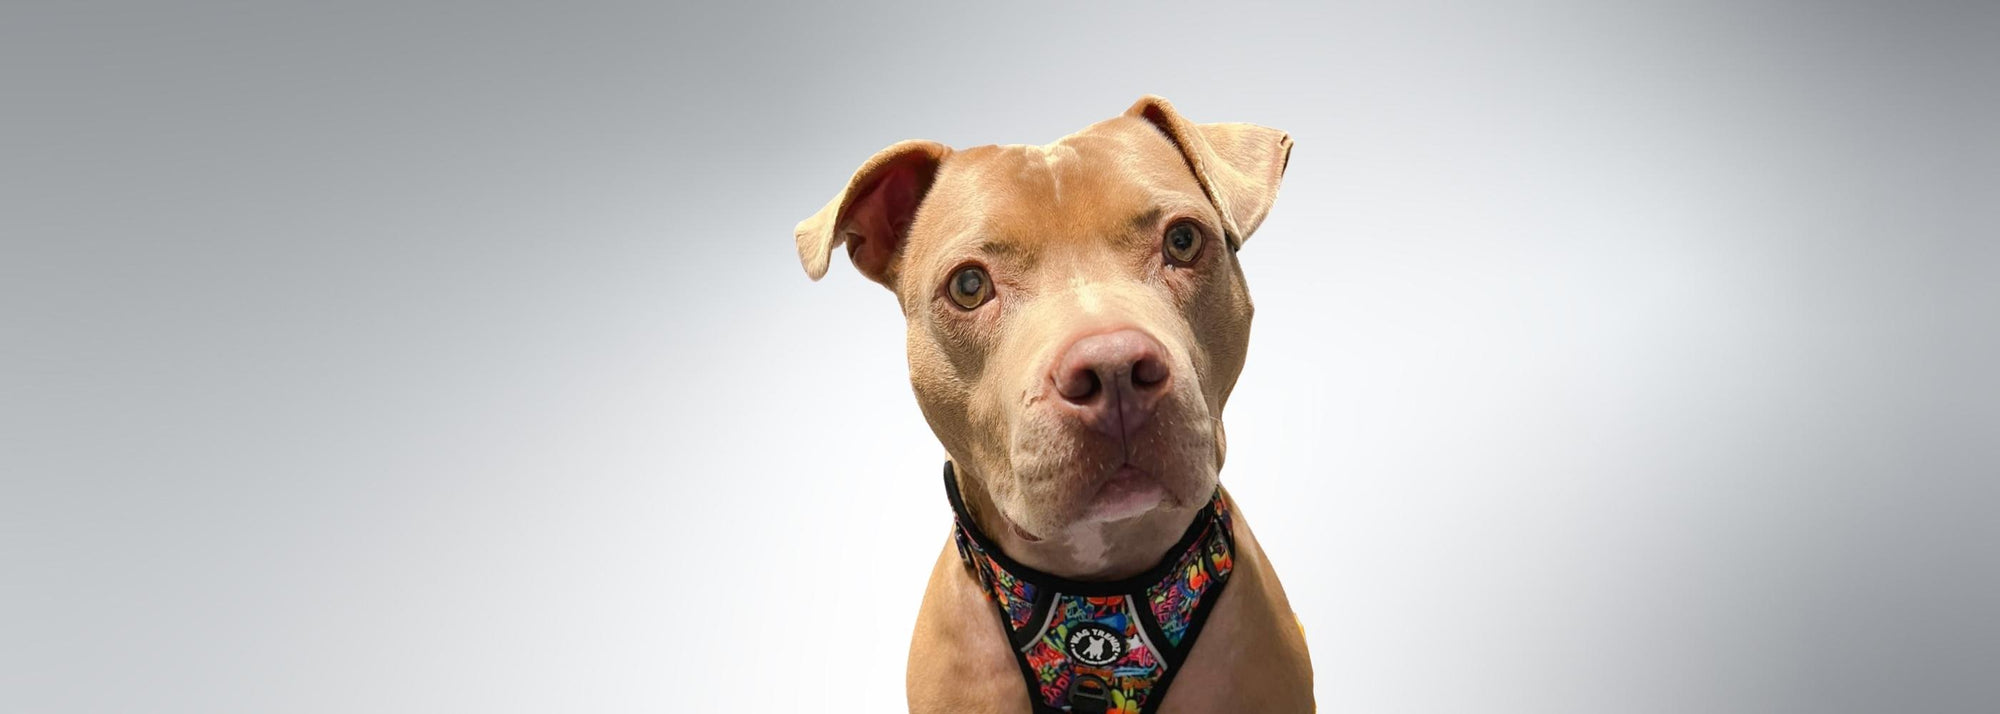 Large Dog Harnesses - No Pull With Handle - Pit Bull Mix wearing multi colored Graffiti dog harness - against light gray background - Wag Trendz